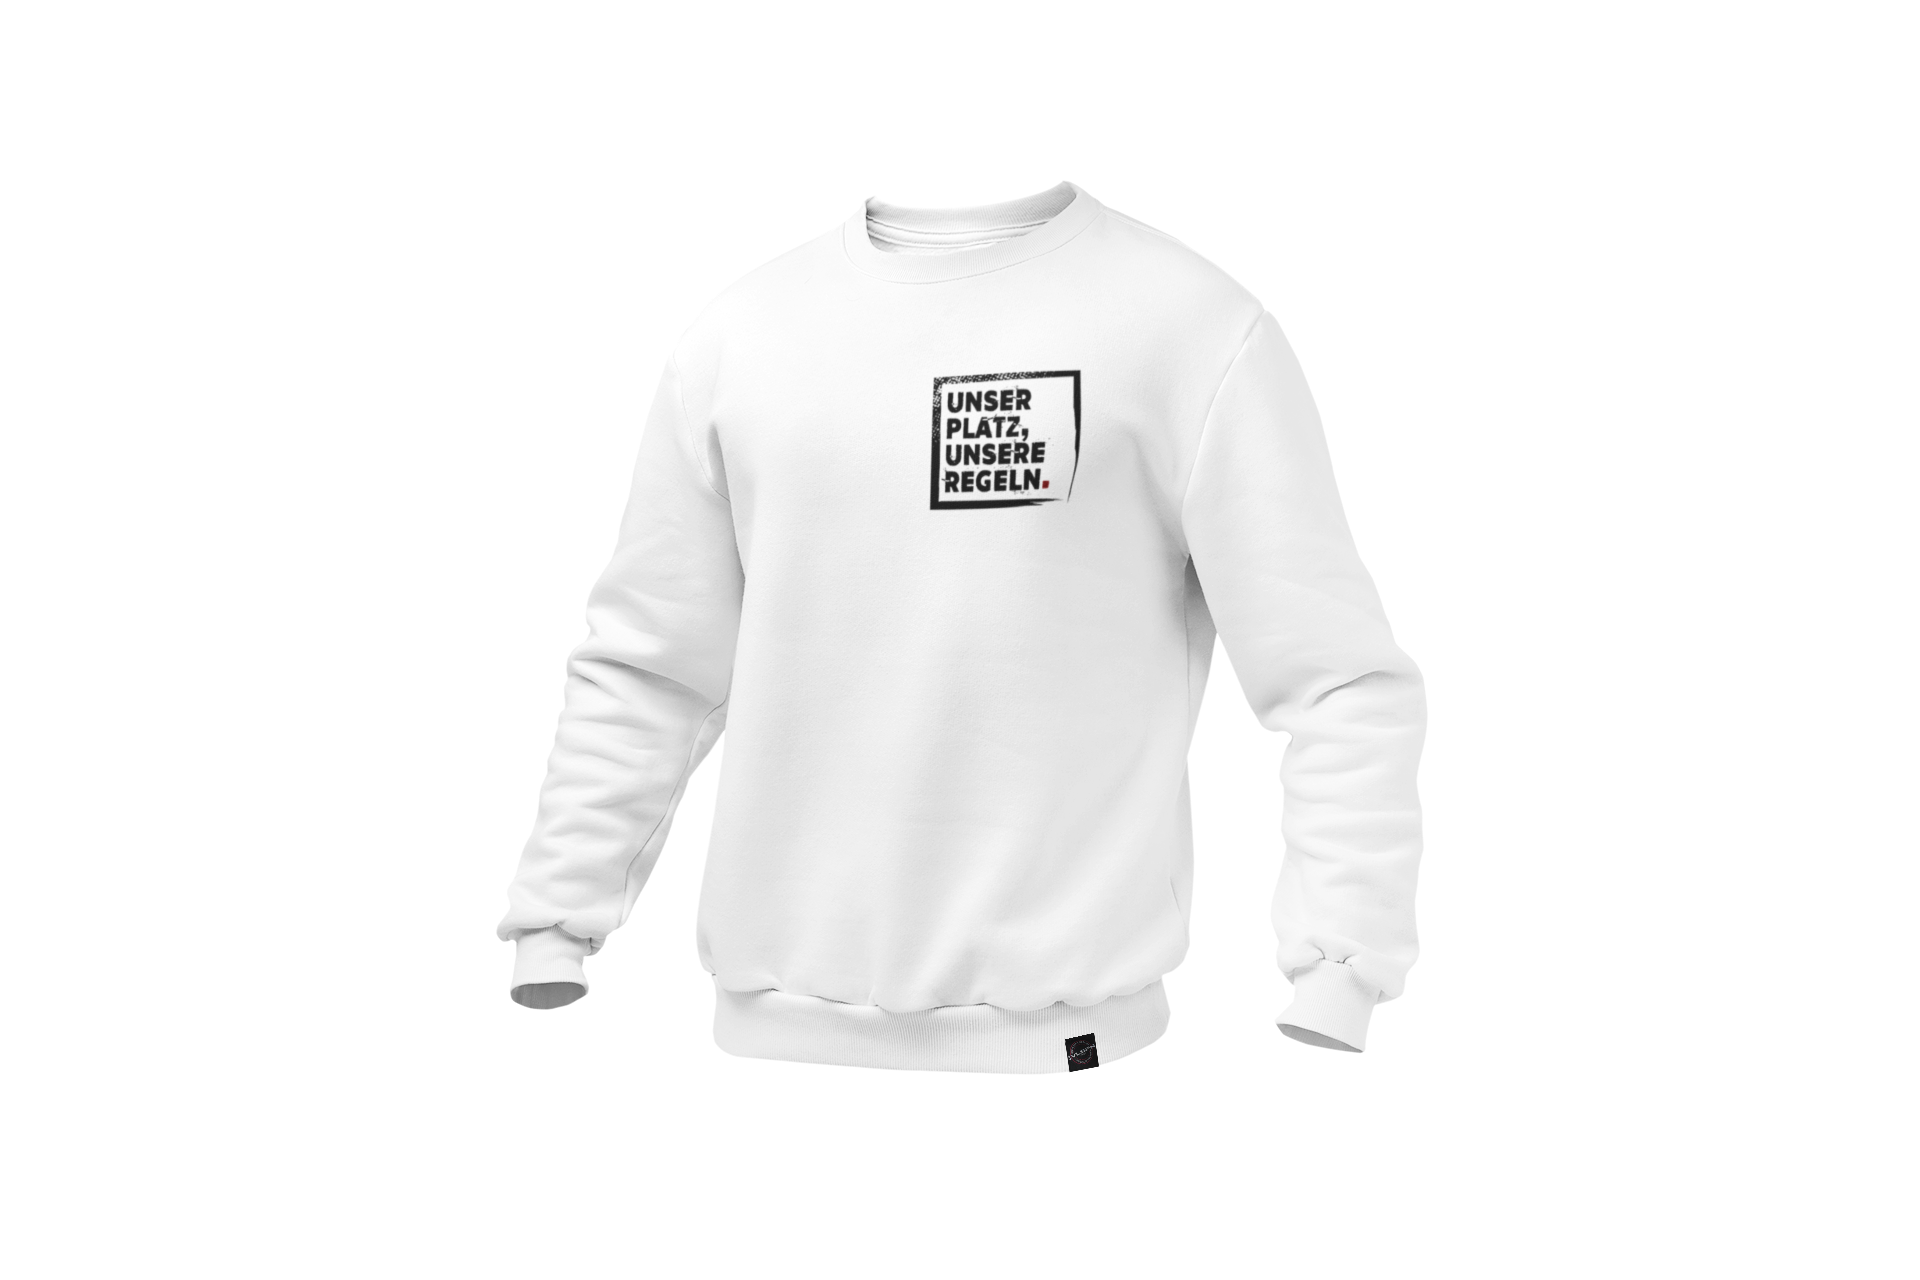 mockup-of-a-ghosted-crewneck-sweatshirt-over-a-solid-background-26960 - 2021-02-09T143357.696.png